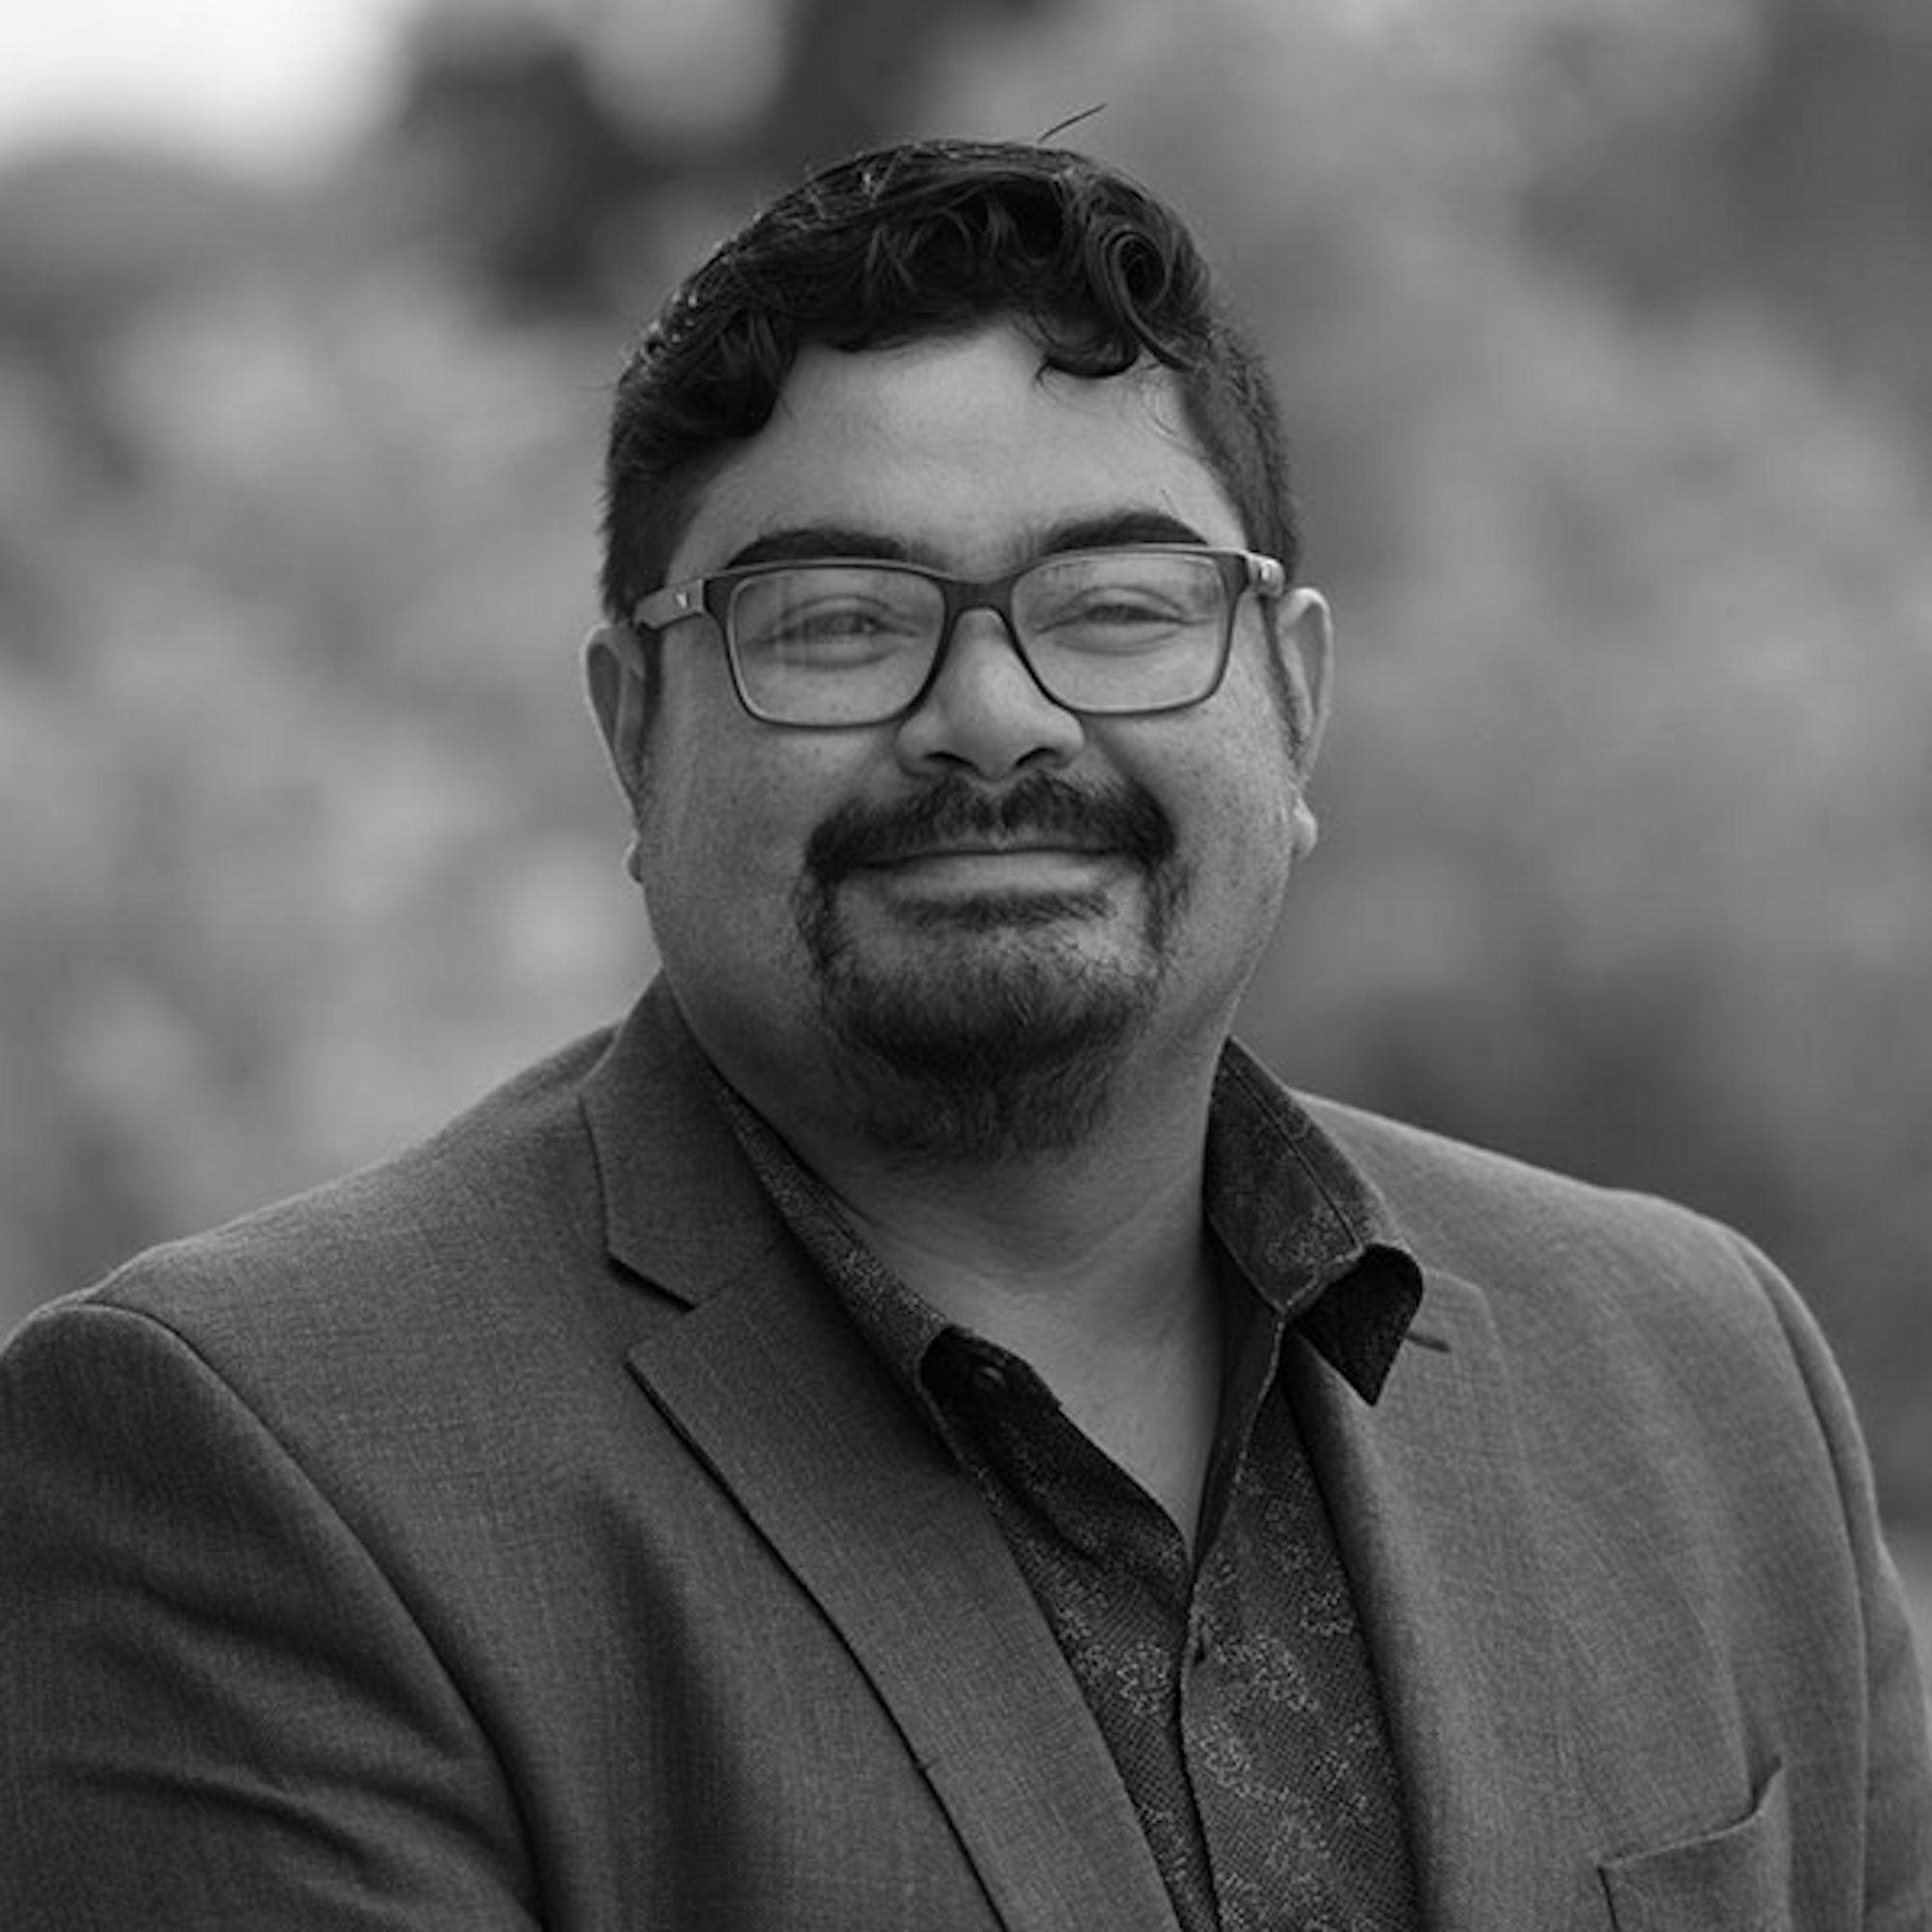 Ricardo Valencia is an assistant professor of communications at California State University, Fullerton. Find him on Twitter: @ricardovalp